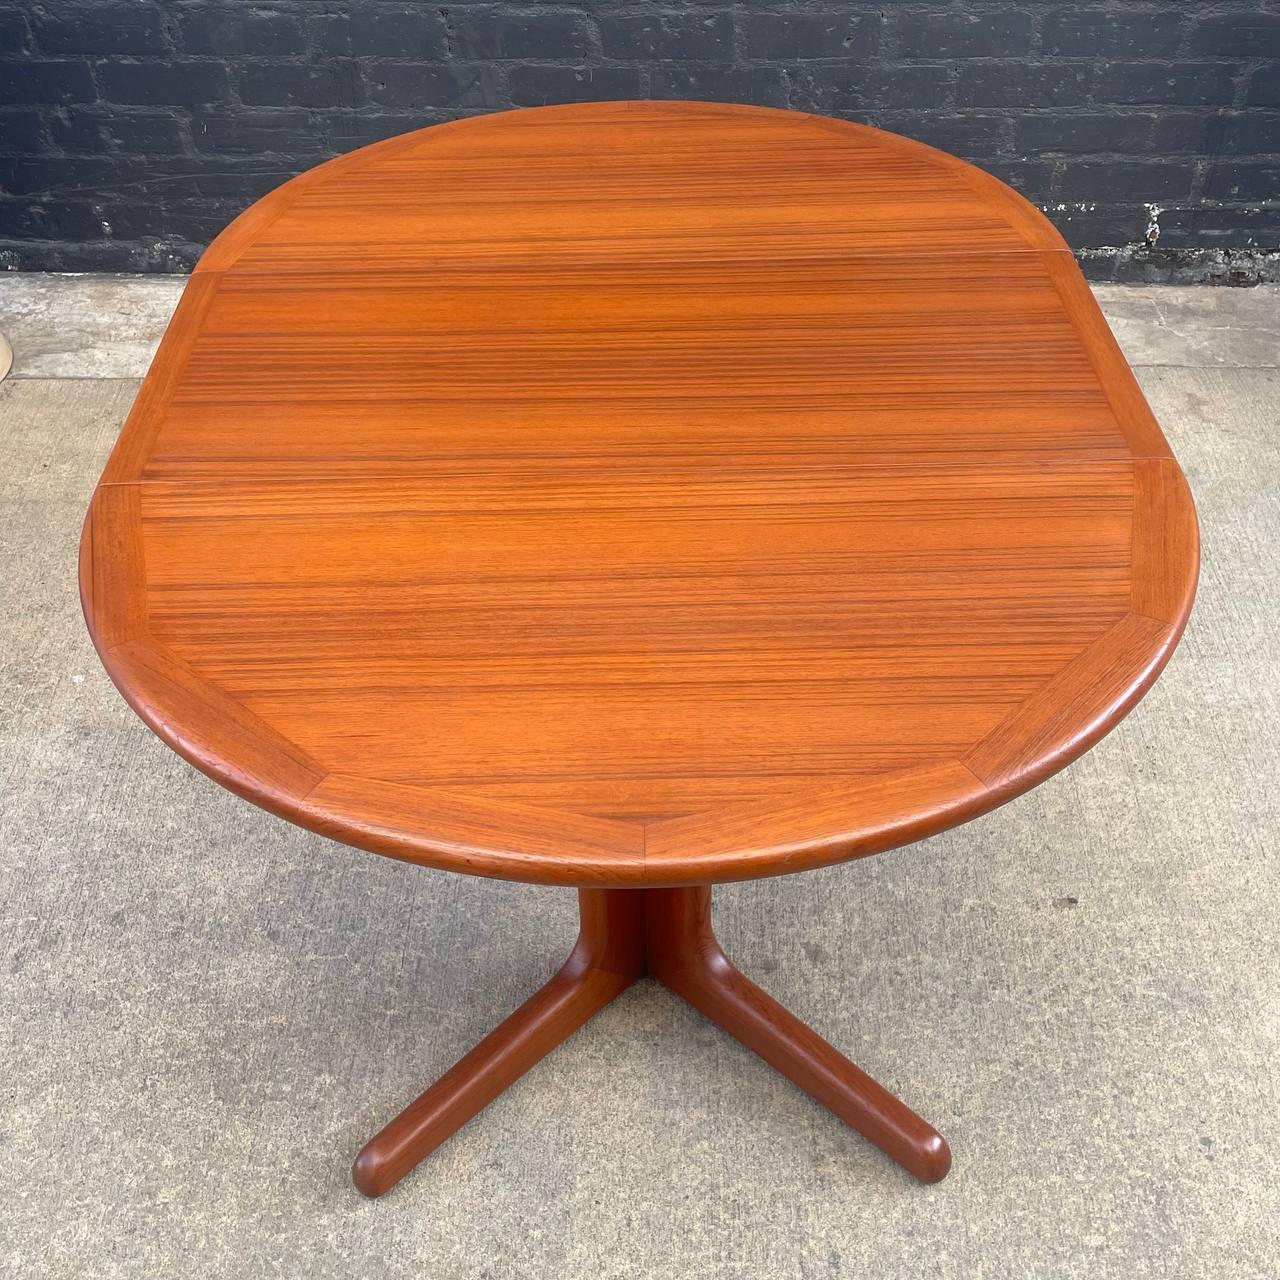 Mid-20th Century Newly Refinished - Mid-Century Danish Modern Expanding Teak Round Dining Table